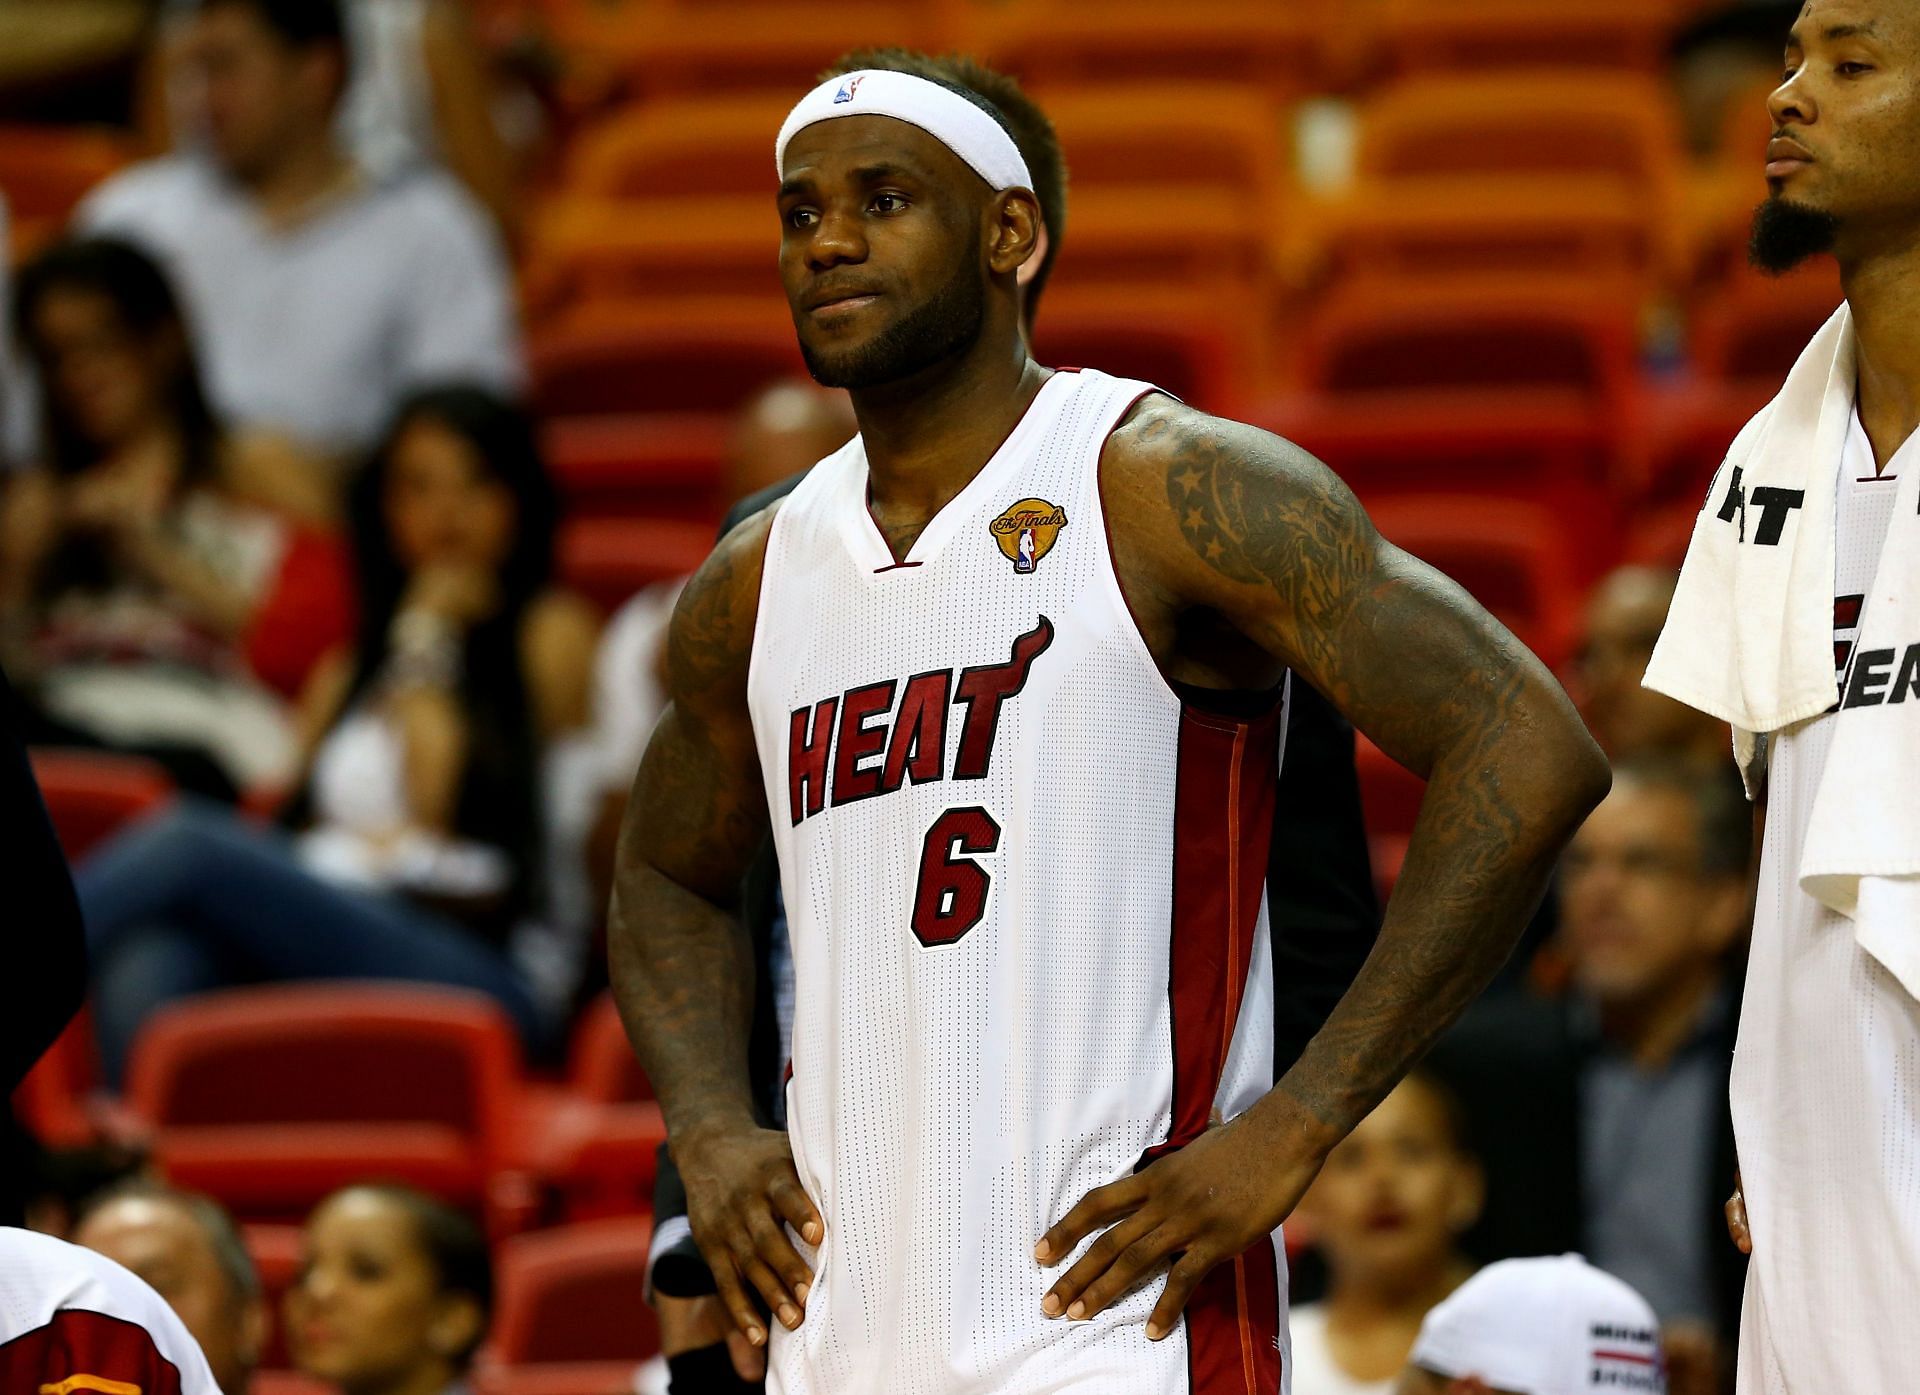 LeBron James of the Miami Heat in the 2014 NBA Finals